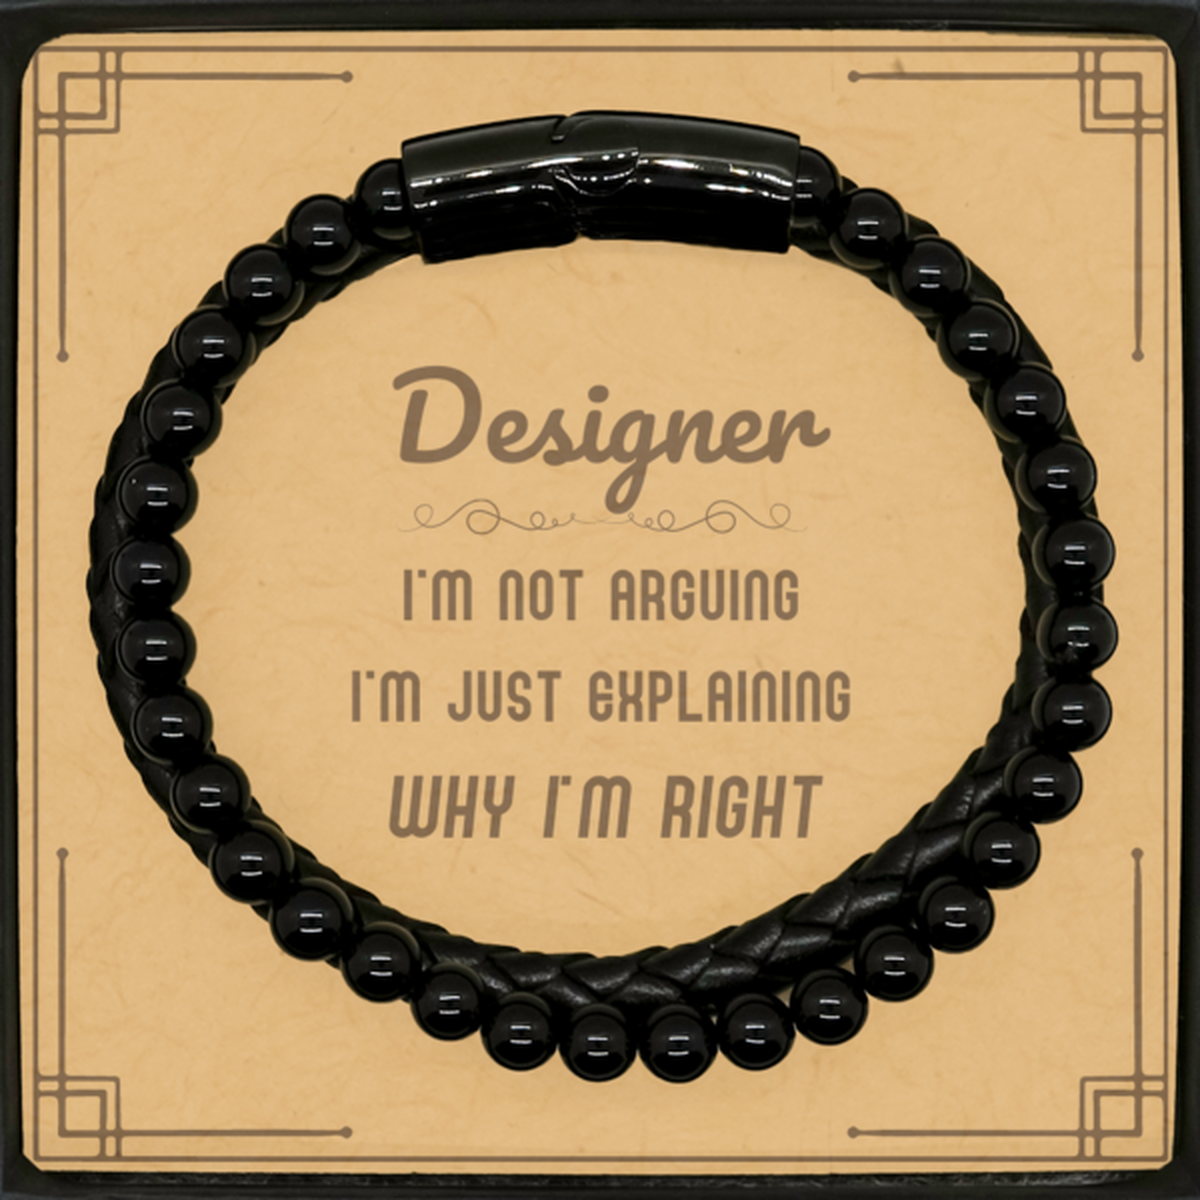 Designer I'm not Arguing. I'm Just Explaining Why I'm RIGHT Stone Leather Bracelets, Funny Saying Quote Designer Gifts For Designer Message Card Graduation Birthday Christmas Gifts for Men Women Coworker